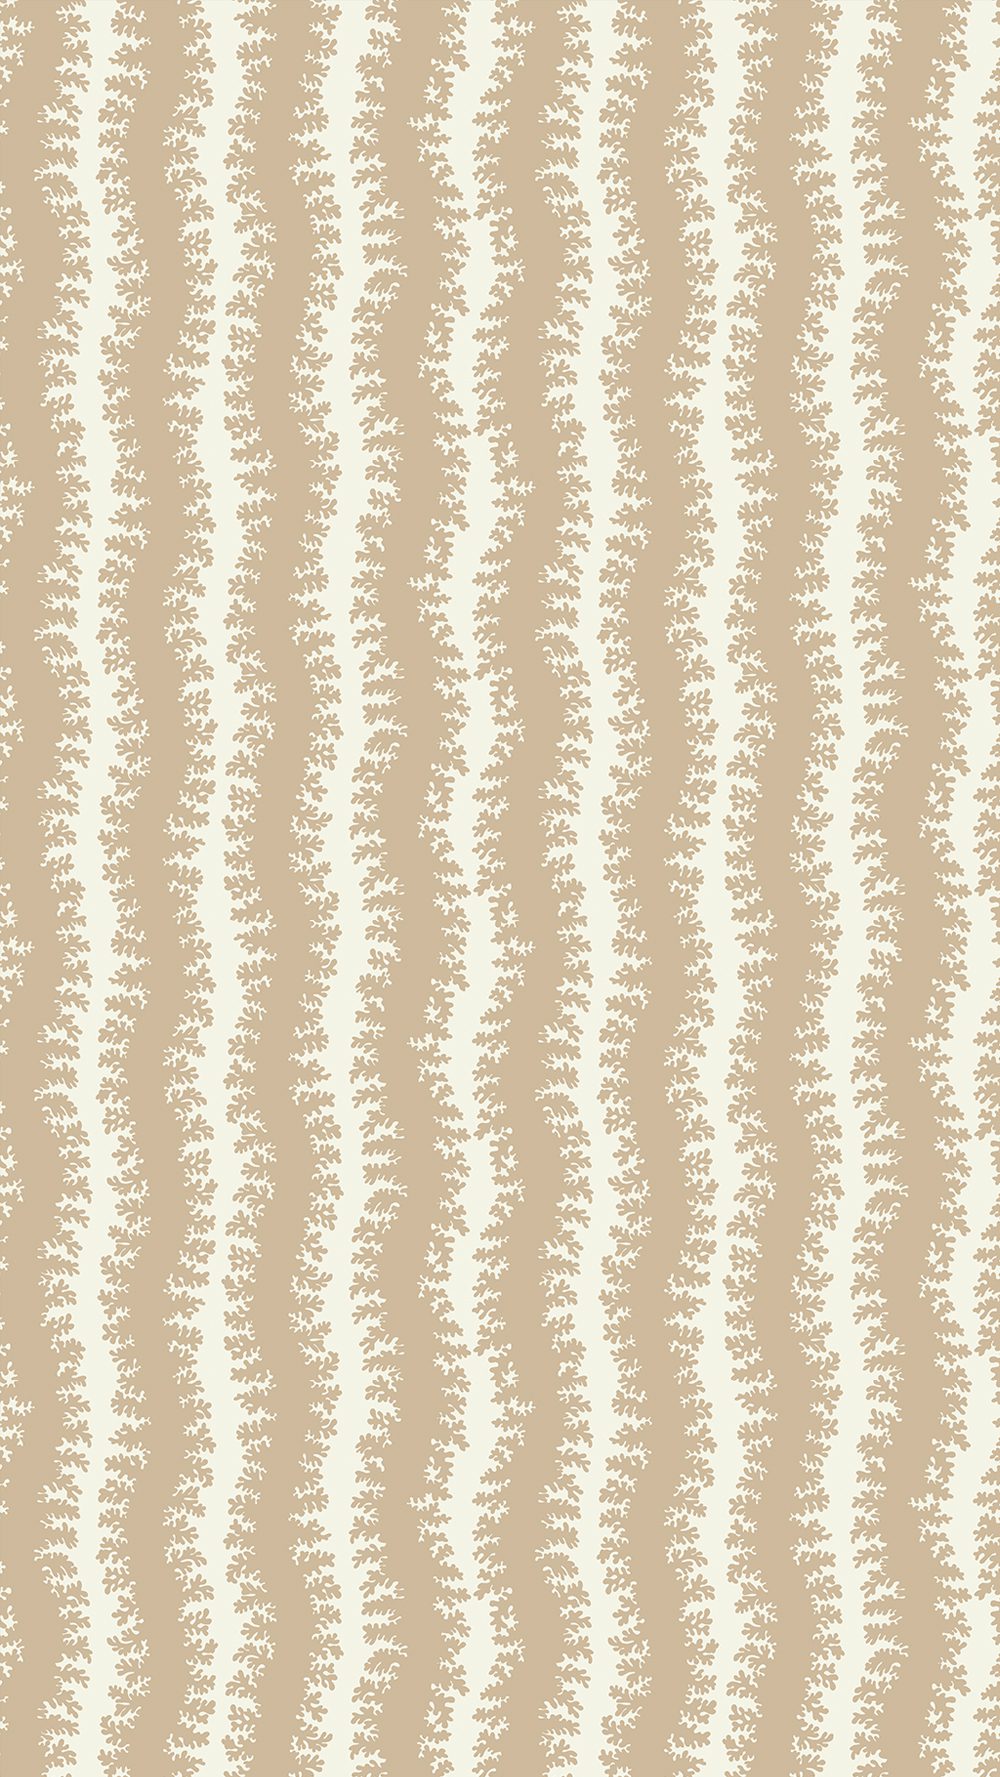 Josephine-Munsey-Roll-collection-wallpaper-elkhorn-strope-scalloped-wave-stripe-wallpaper-elkhork-edged-silhouette-soft-edged-wide-stripe-Stepping-stone-ringhill